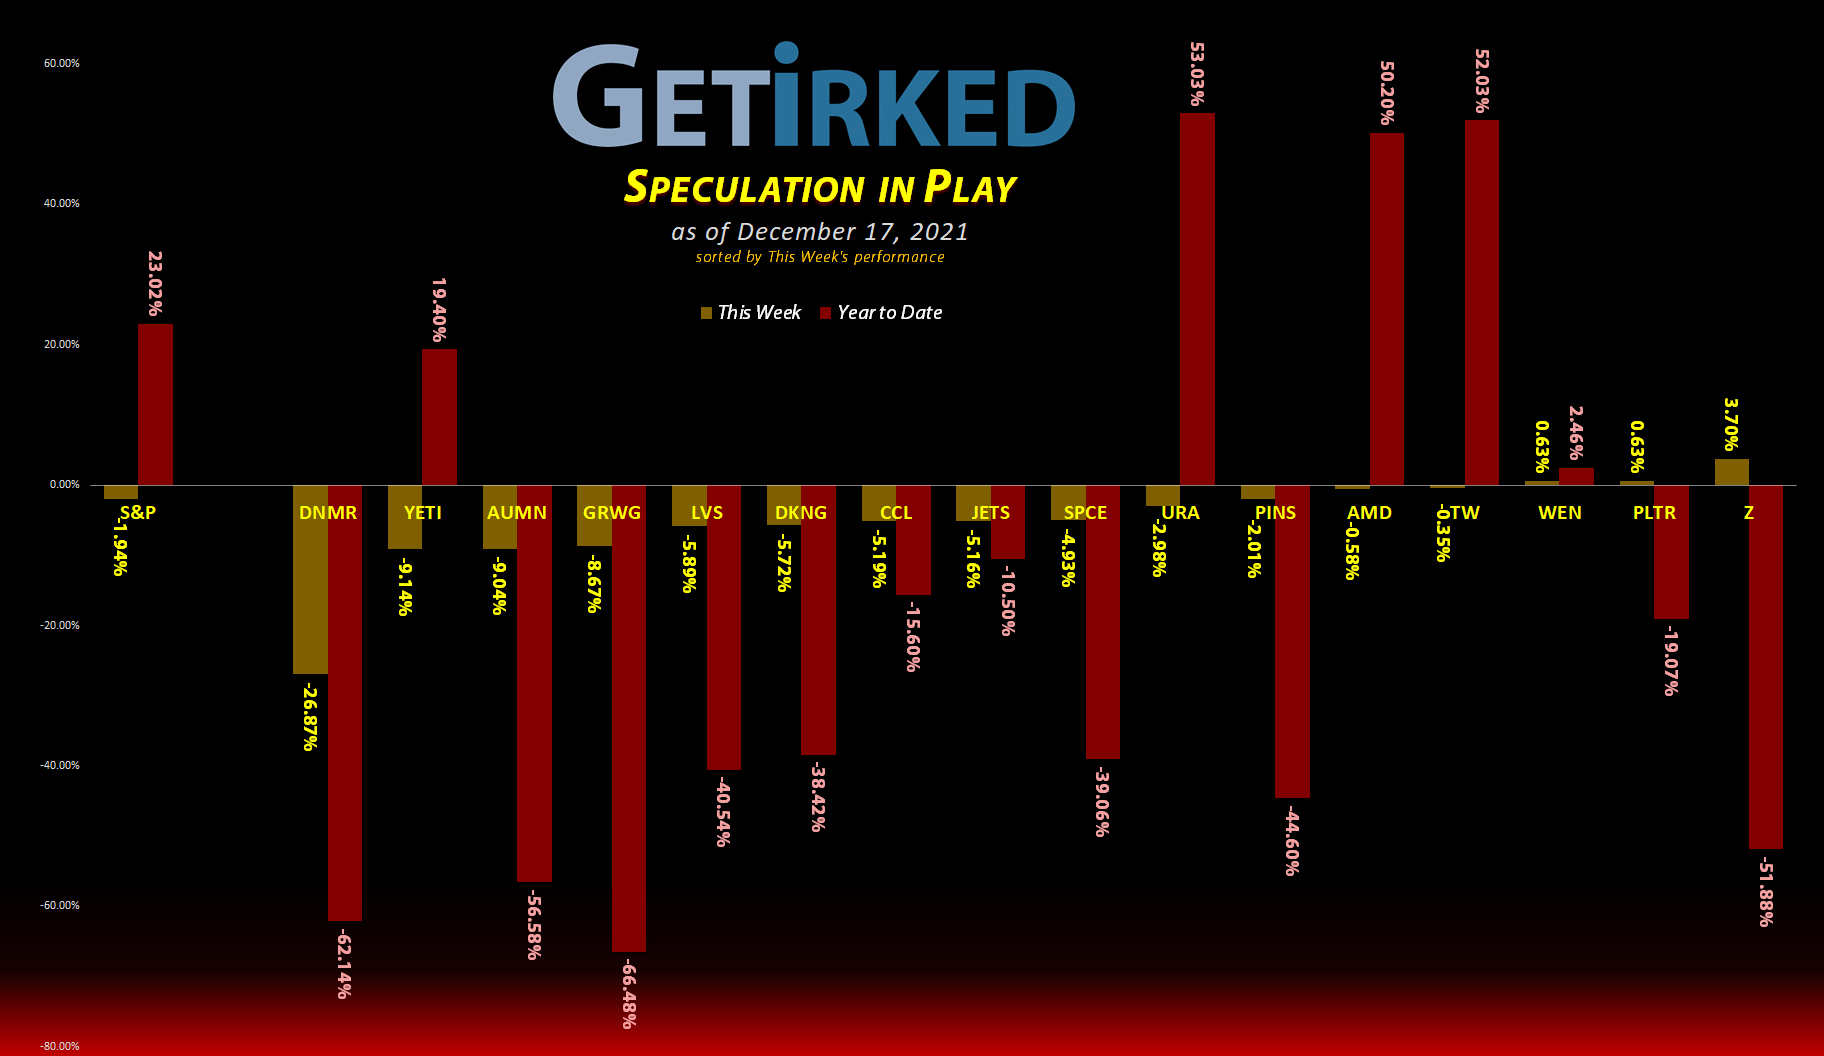 Get Irked's Speculation in Play - December 17, 2021